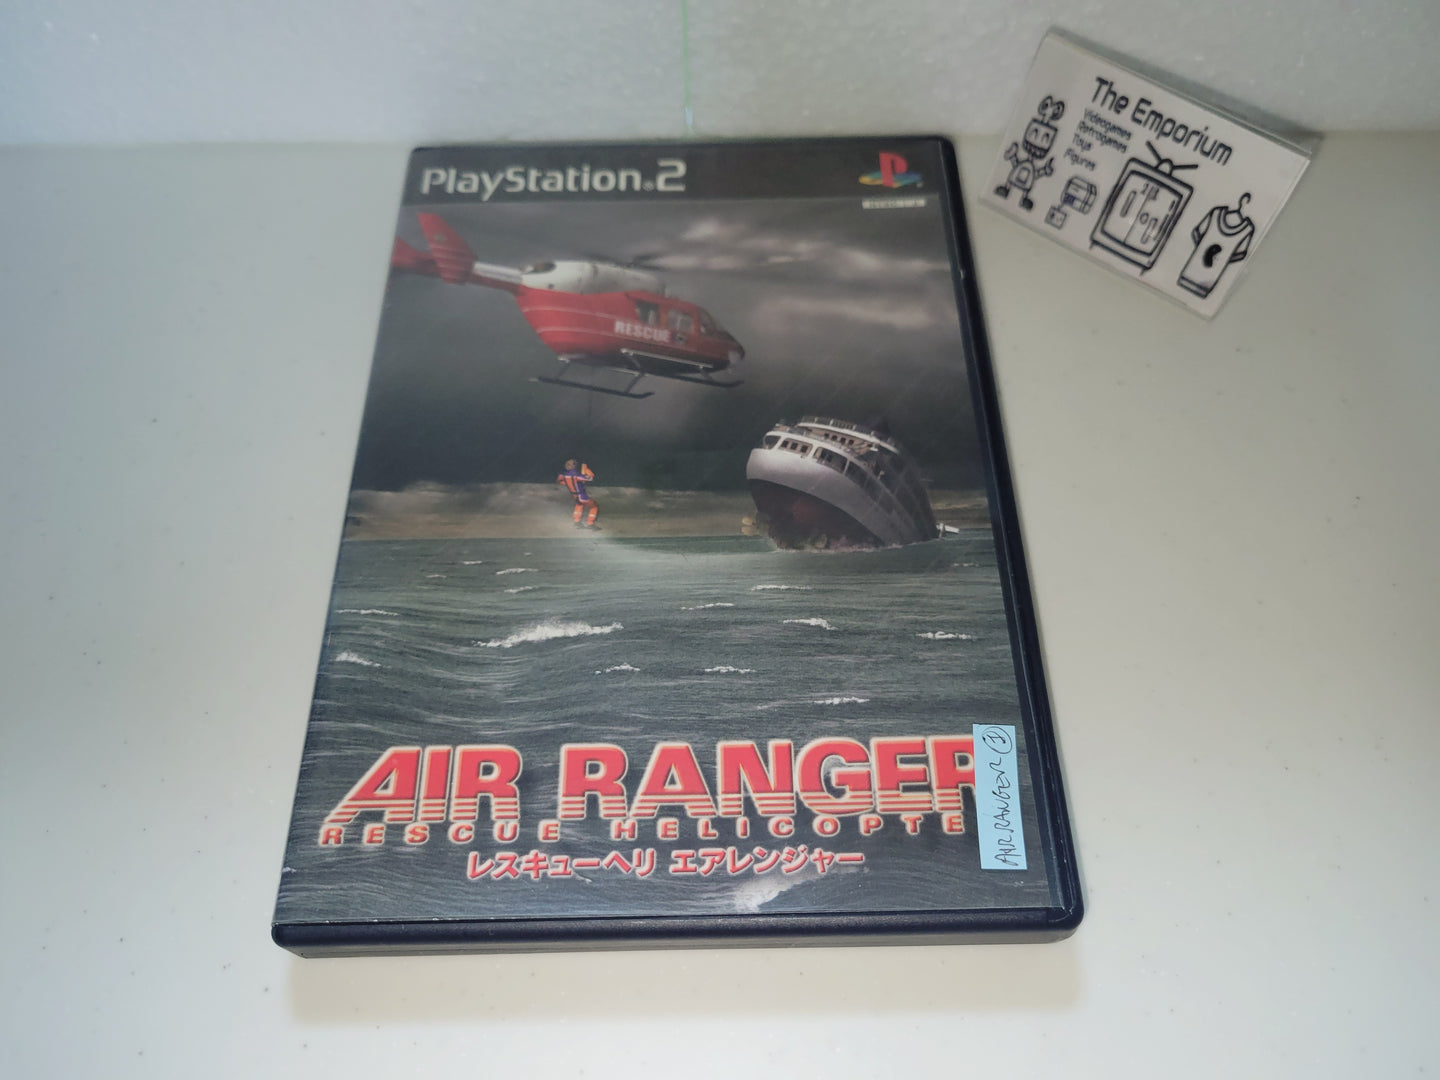 Air Ranger Rescue Helicopter - Sony playstation 2